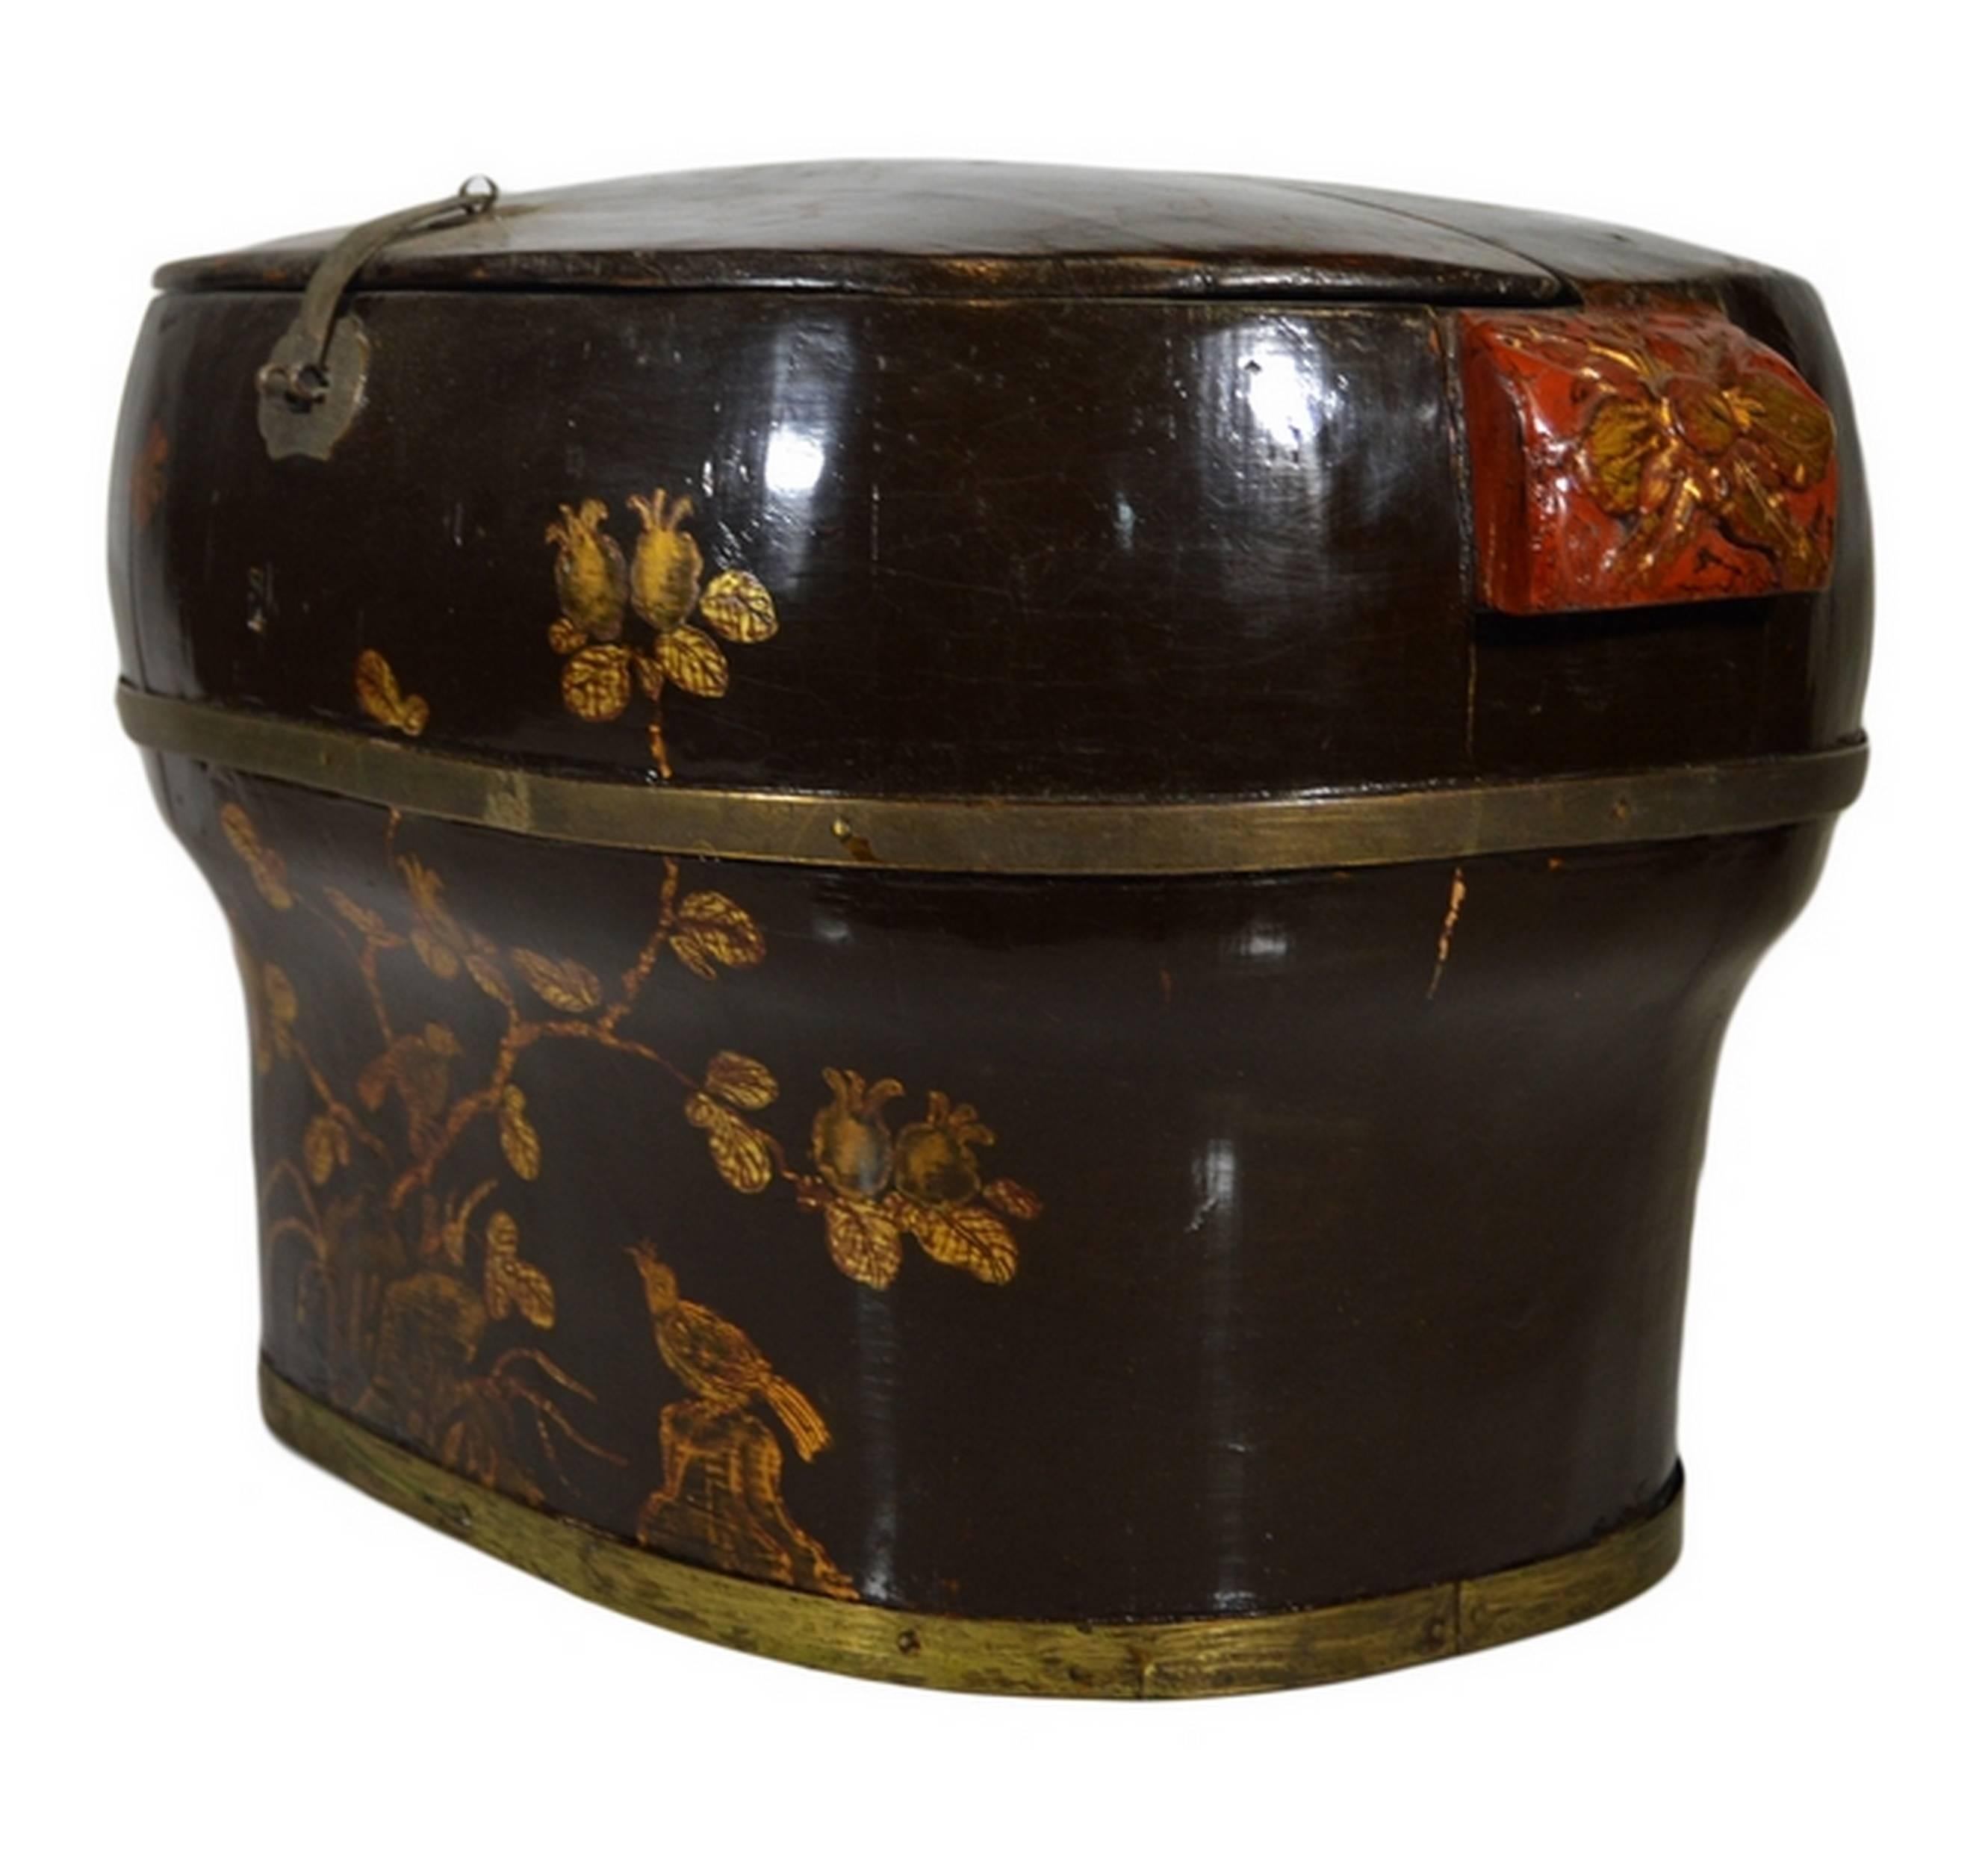 A beautifully hand-painted and lacquered 19th century Chinese wedding box with flowers showcasing an unusual round shape. This box is made of lacquered wood with metal hardware details such strip on the bottom and another separating the upper and